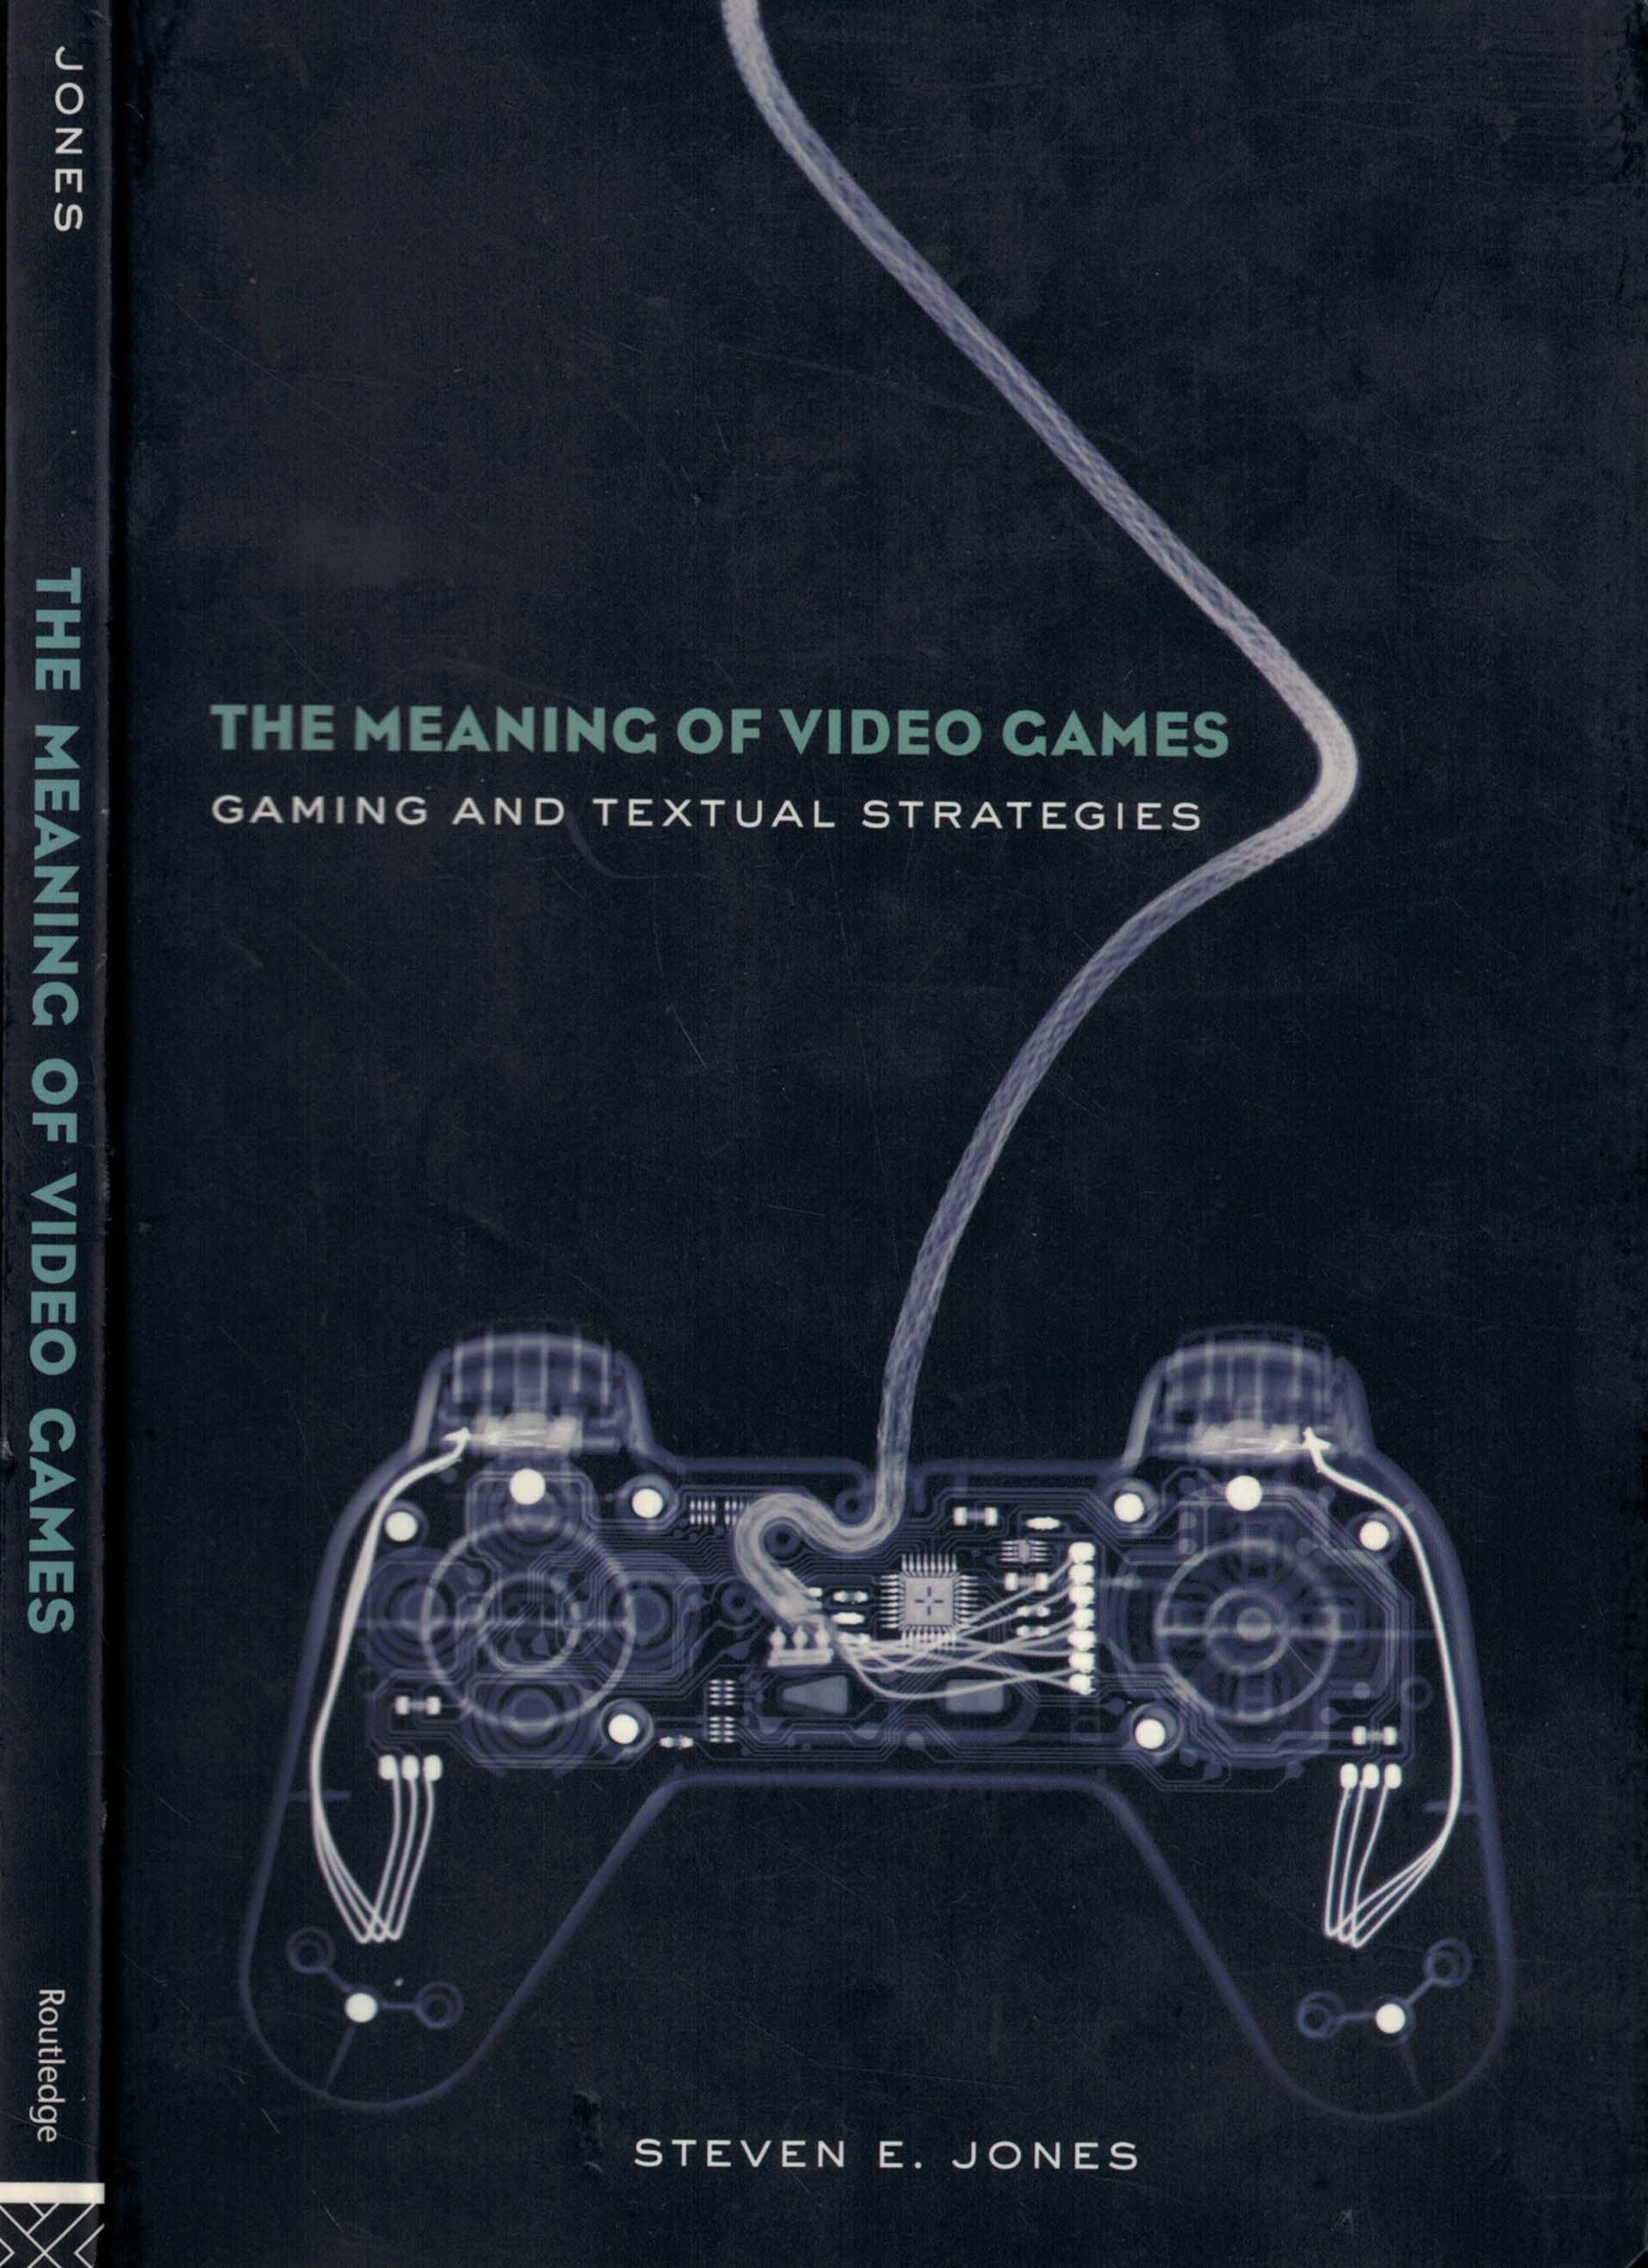 The Meaning of Video Games. Gaming and Textual Strategies.